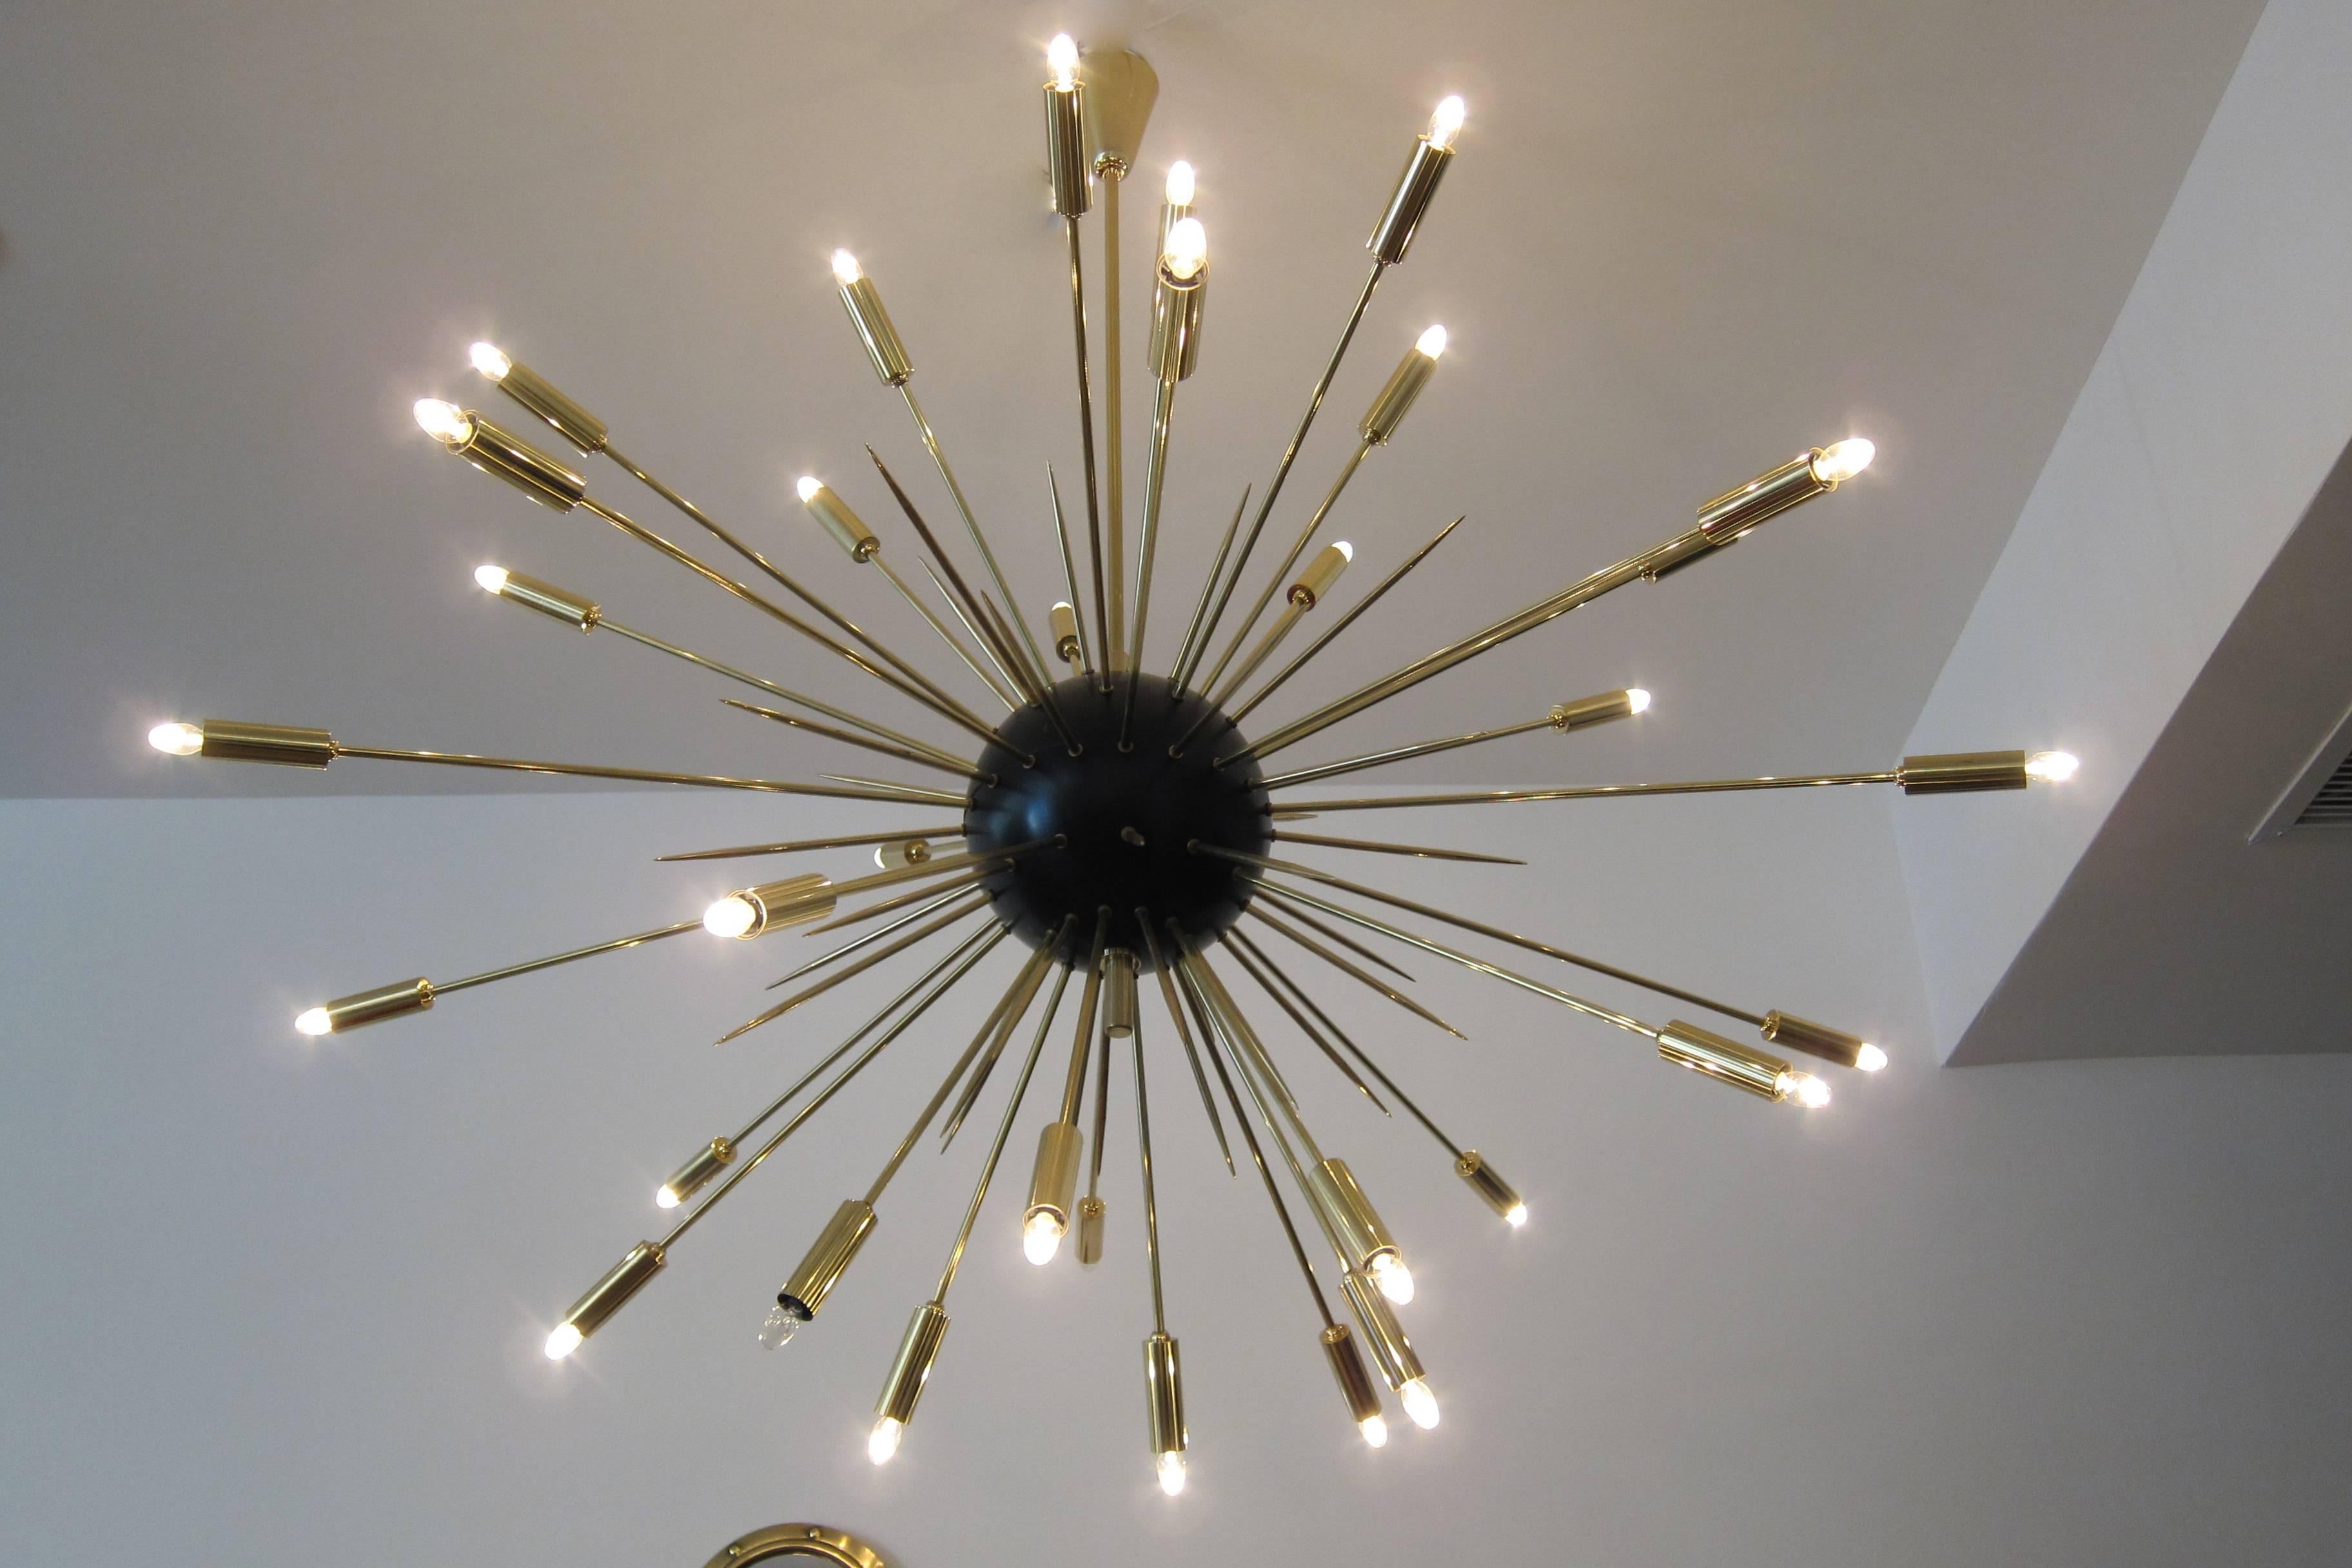 Impressive Italian mid-centurry modern style sputnik studio chandelier, 34 lights and brass spikes coming out of a black enameled bronze sphere.
Wired to the American standard.
